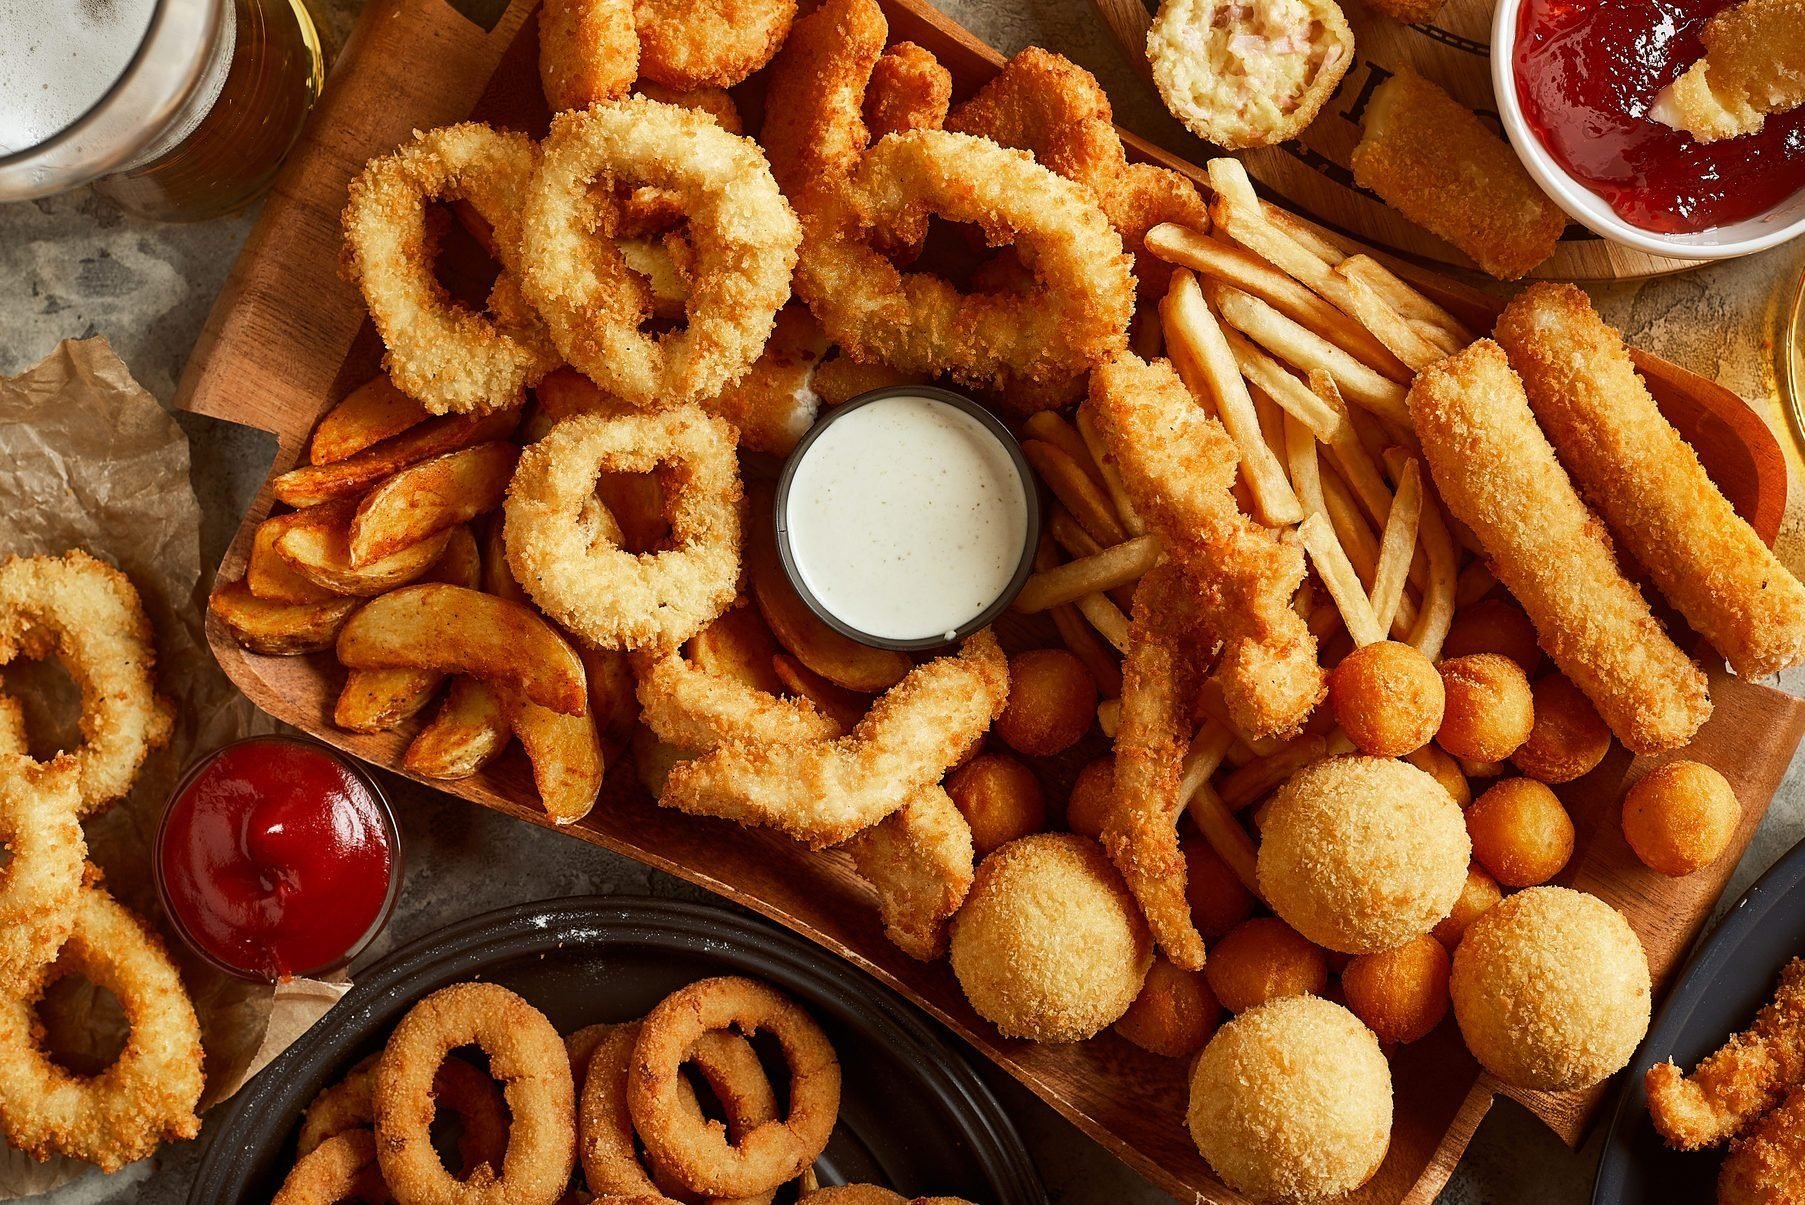 fried foods including French fries and onion rings